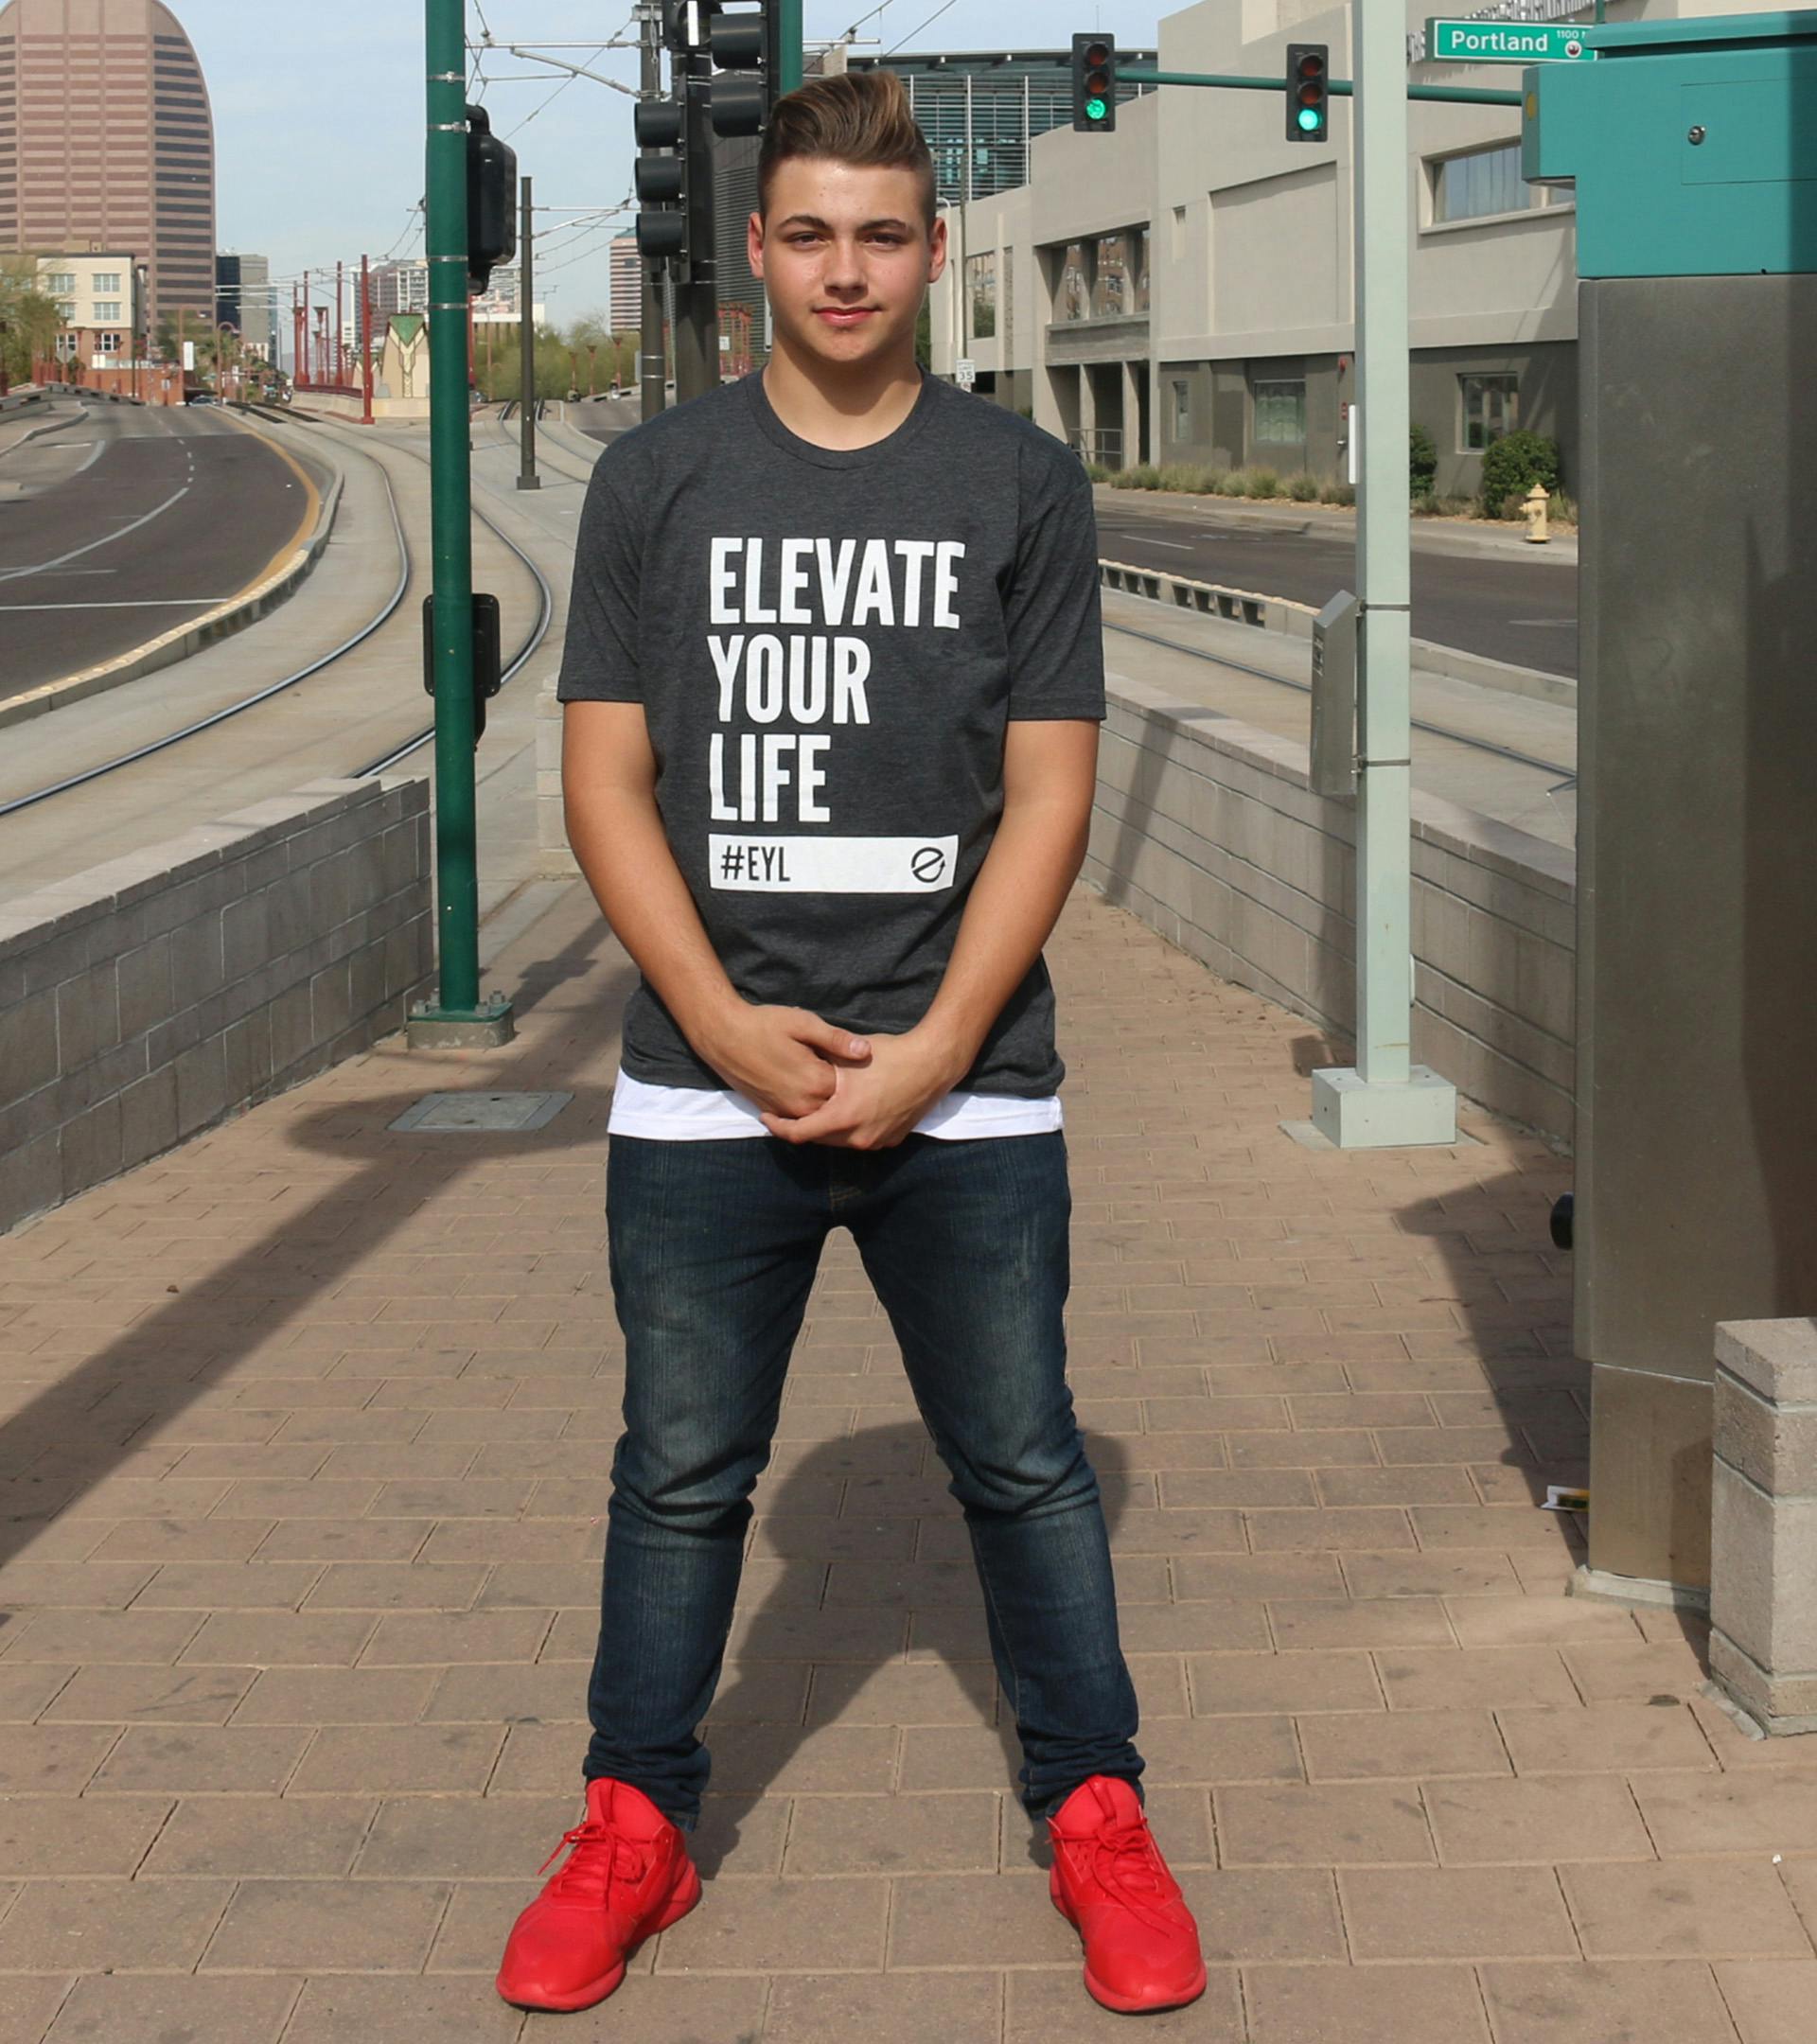 Guy standing wearing a charcoal gray and white Elevate Your Life shirt